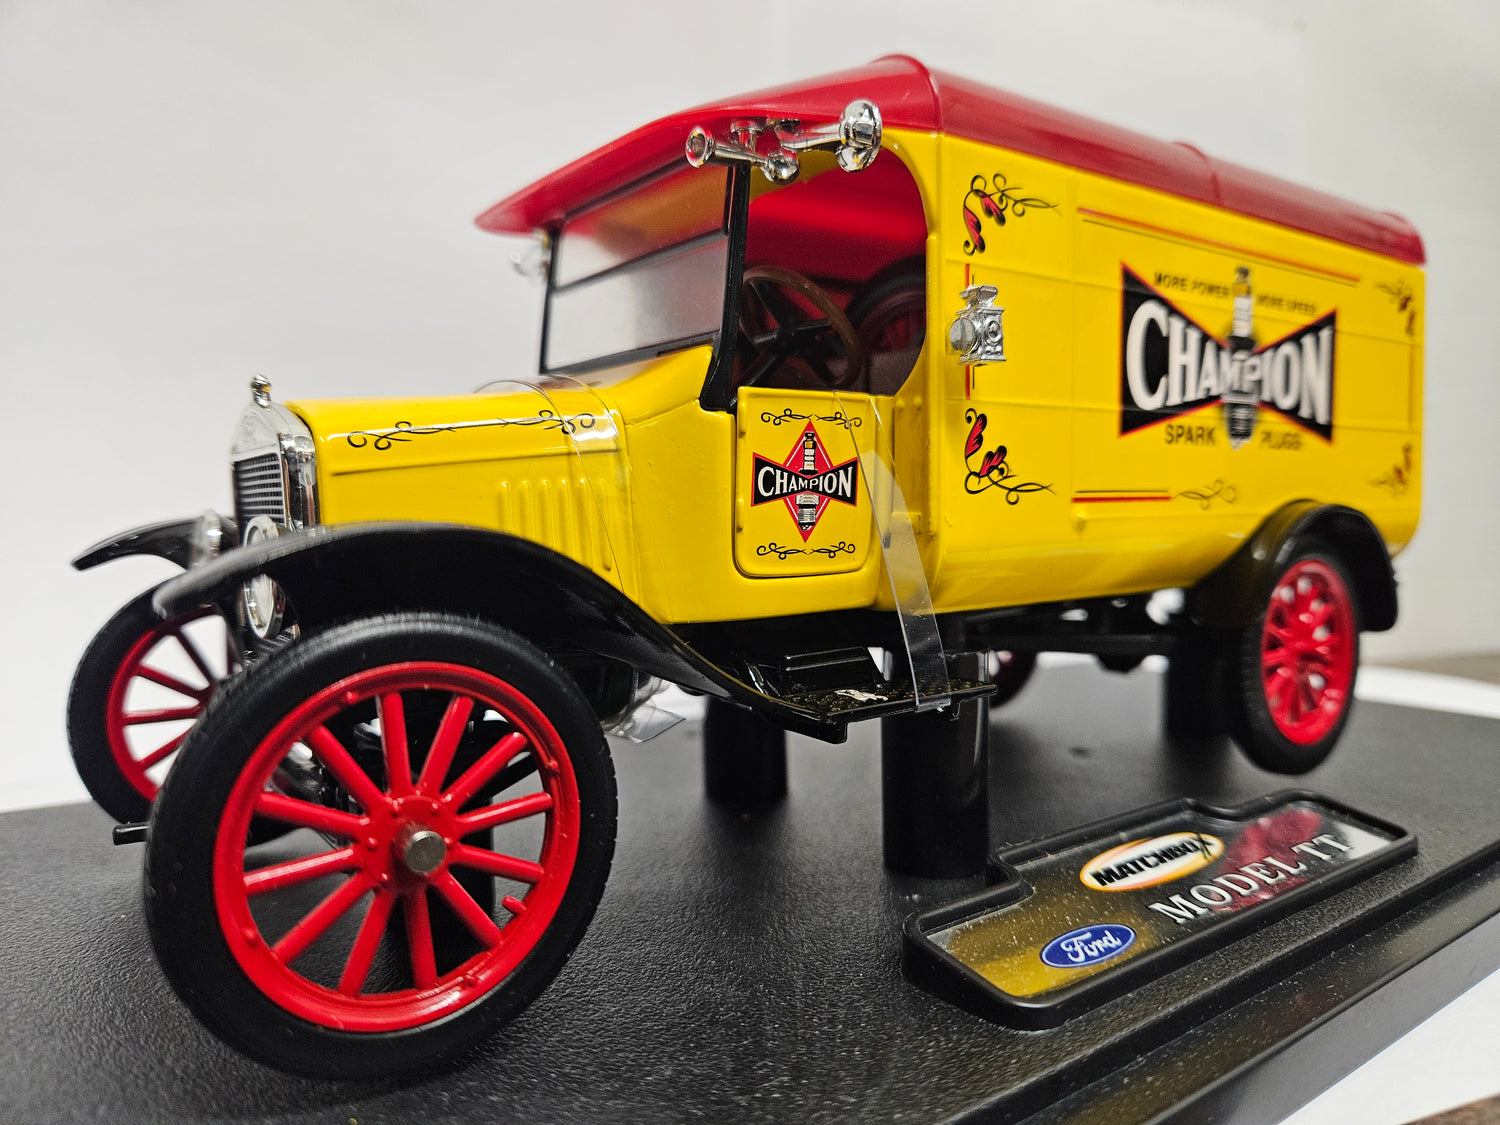 CHAMPION, 1925 Ford Model Delivery Truck (Échelle-Scale 1:24)